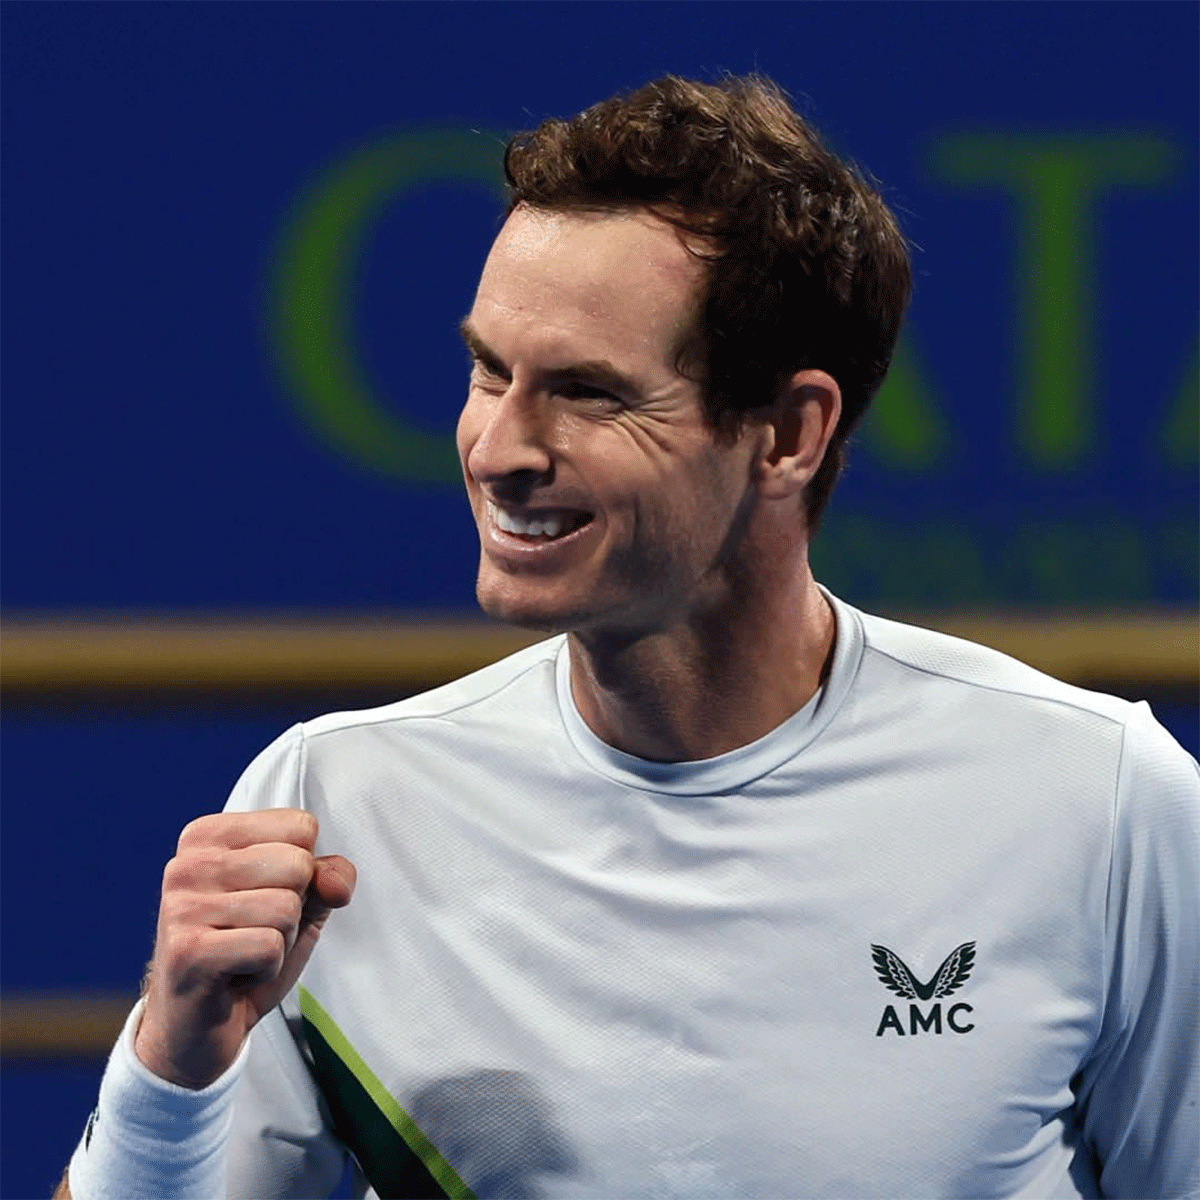 Andy Murray will face Czech Republic's Jiri Lehecka in the semis of the Doha Open